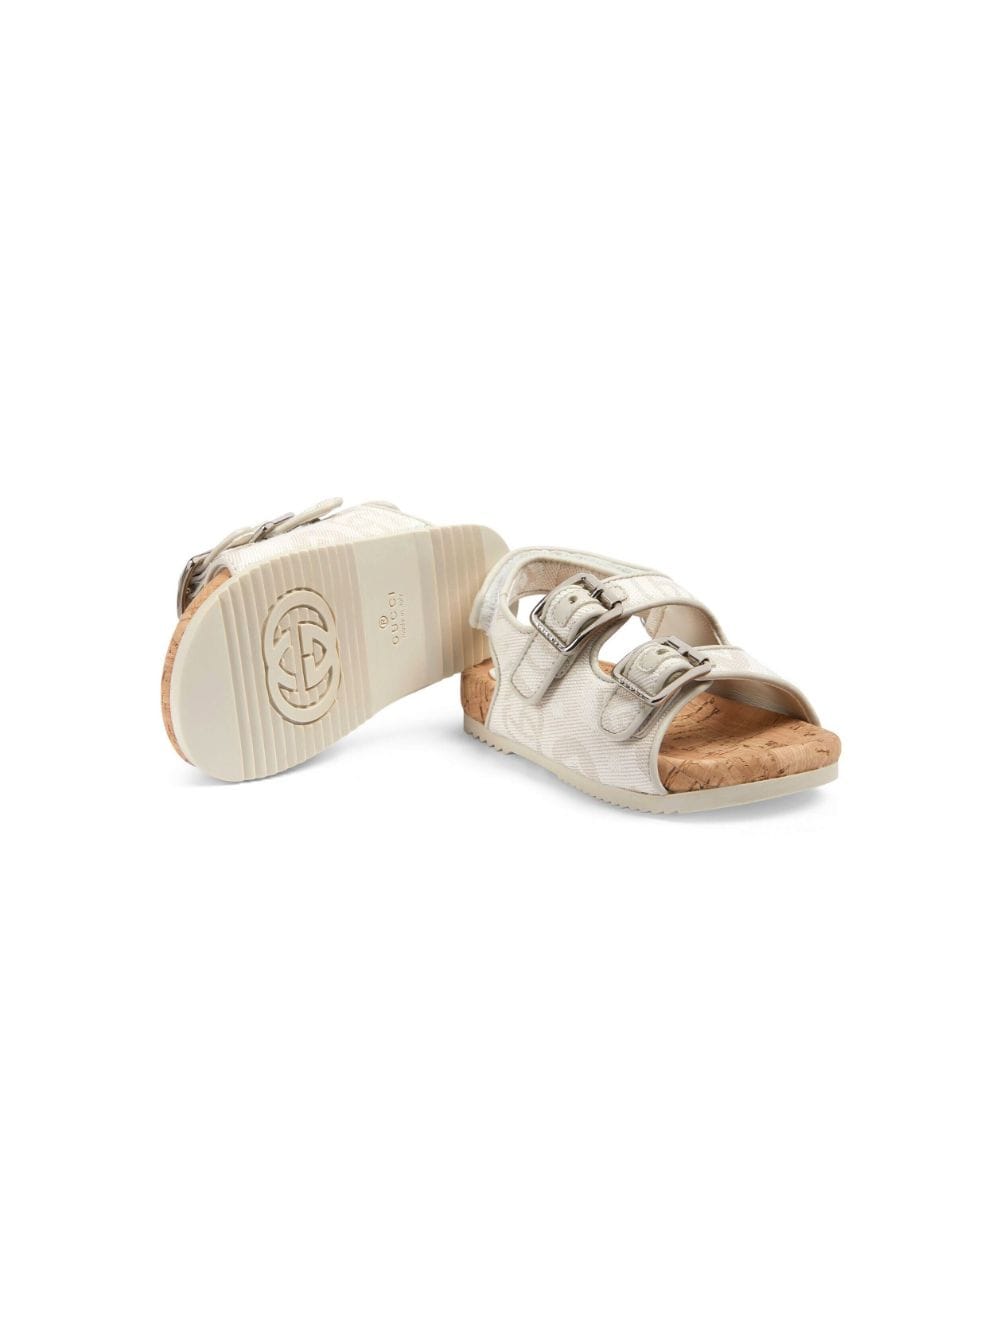 Gucci Kids GG canvas touch-strap sandals - 9142 BIANCO